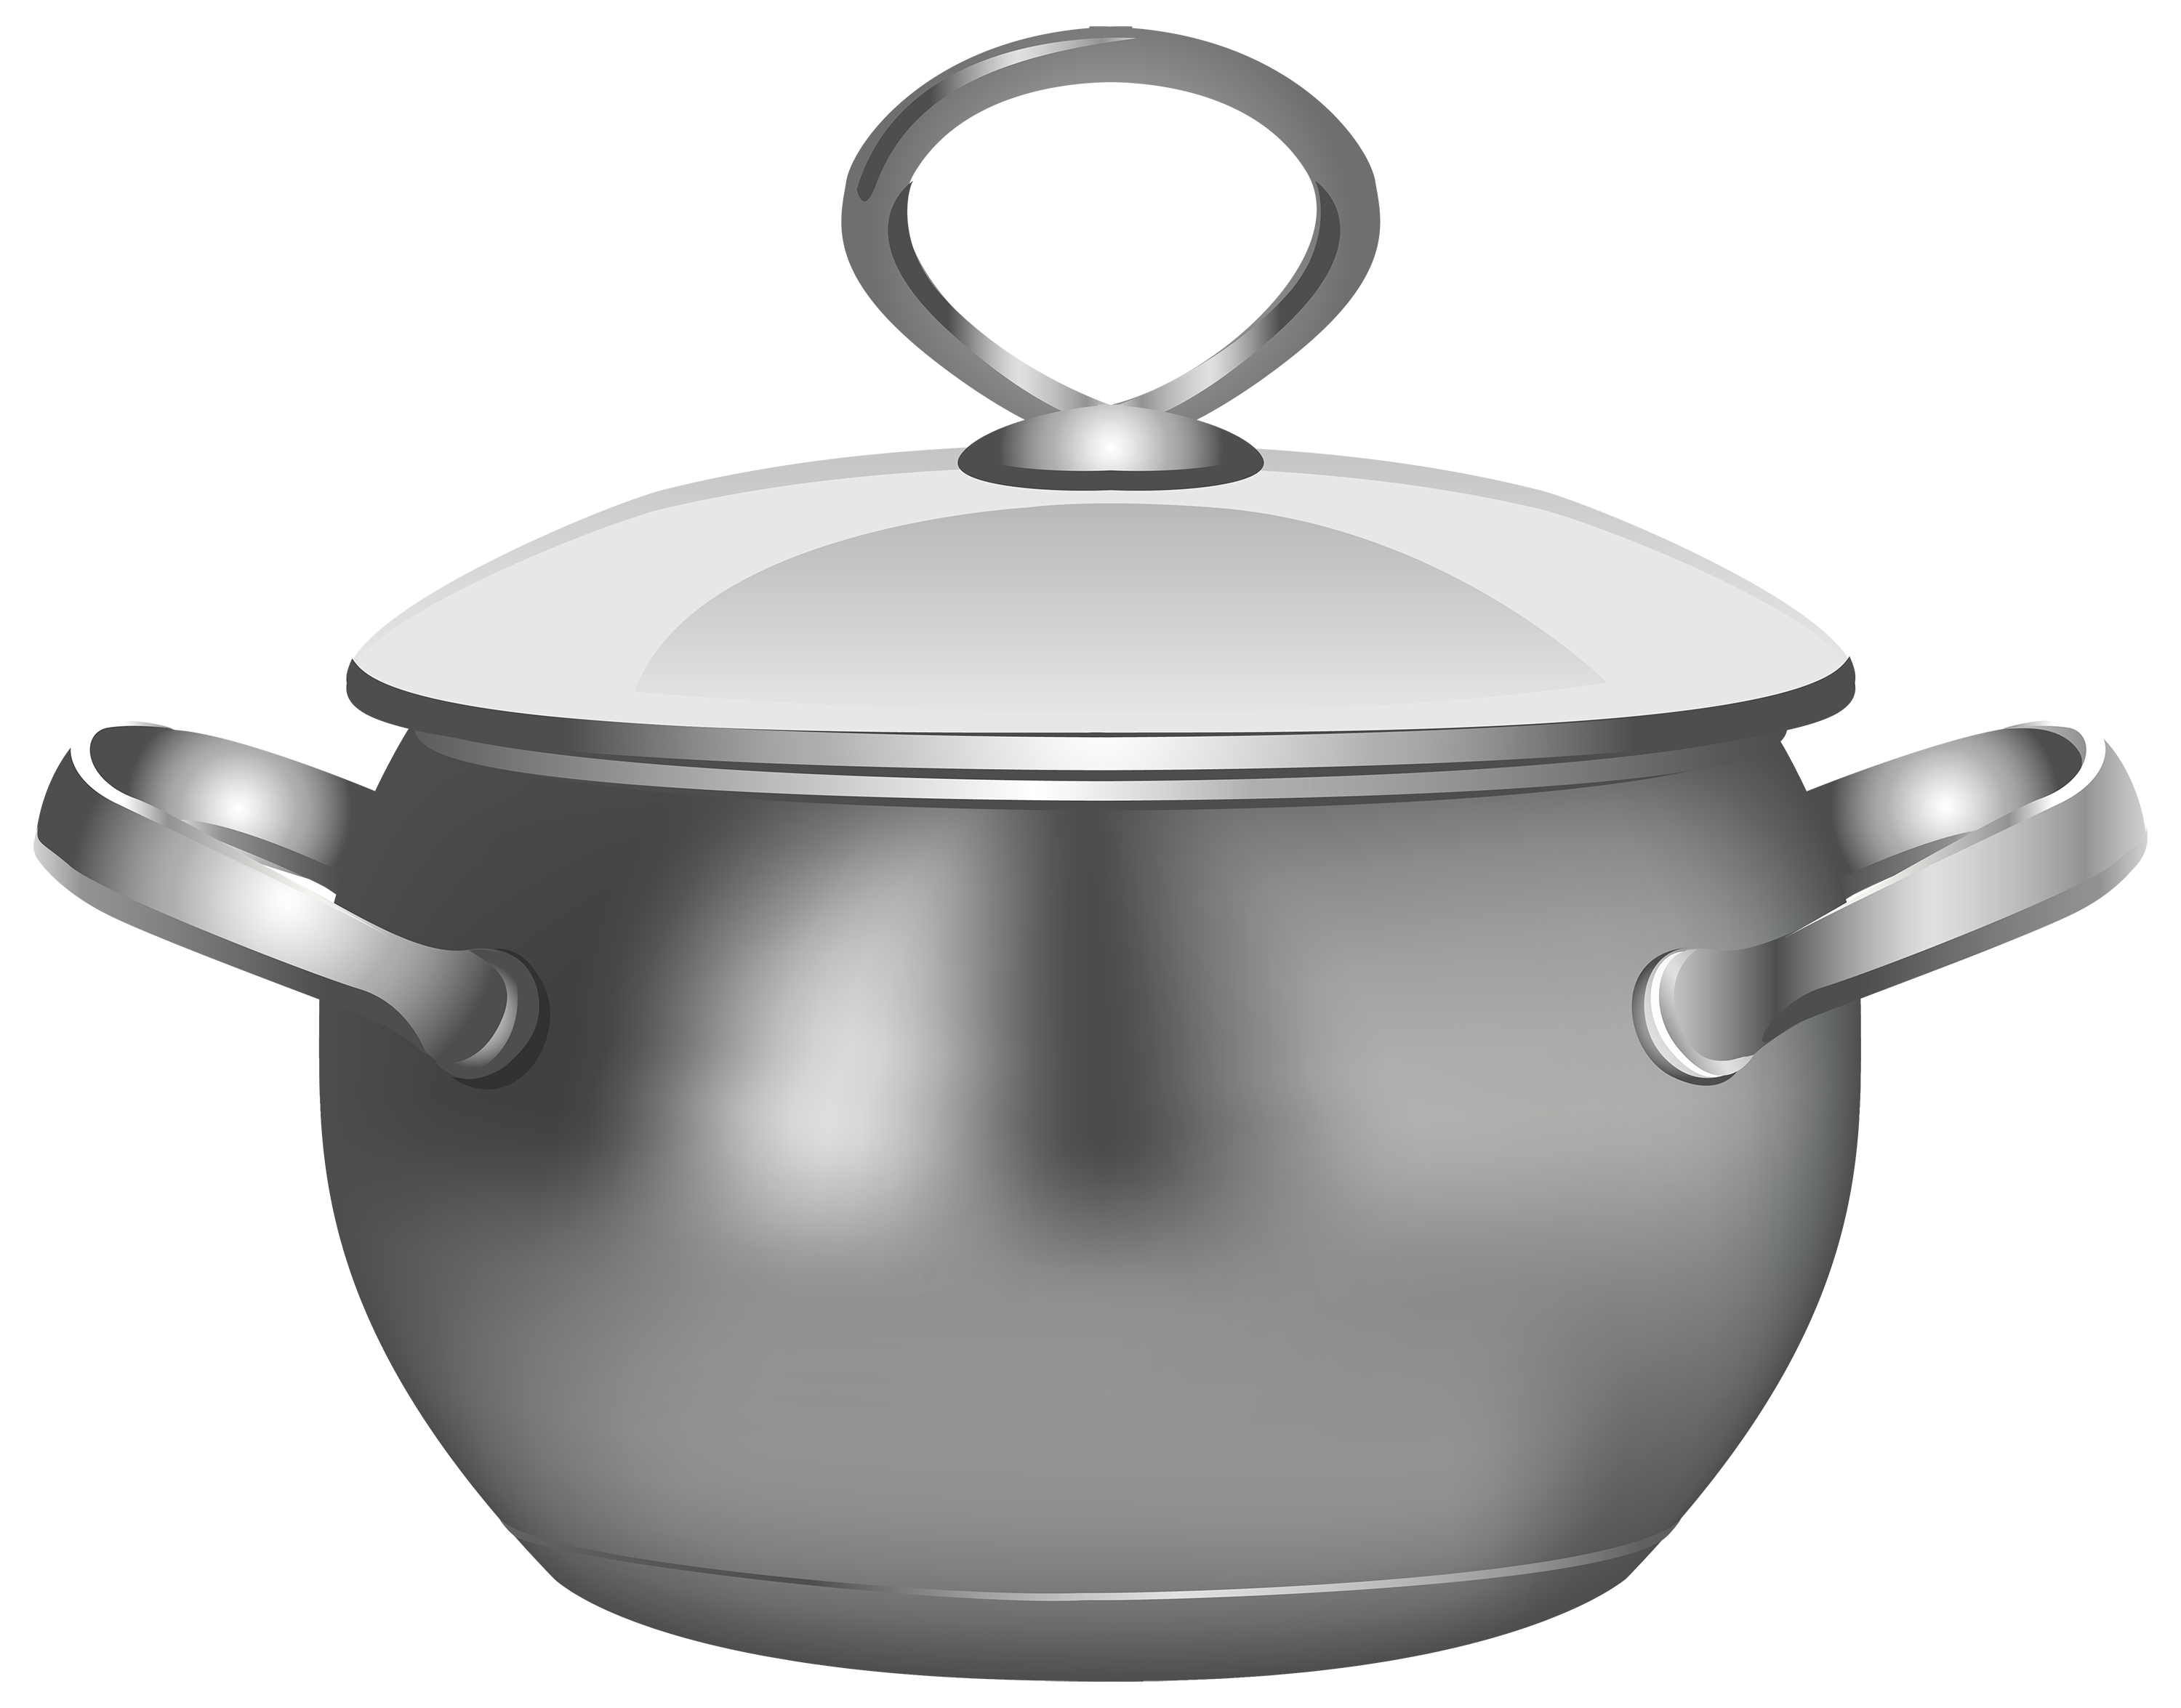 Cooking pot best web. Cook clipart cookery tool